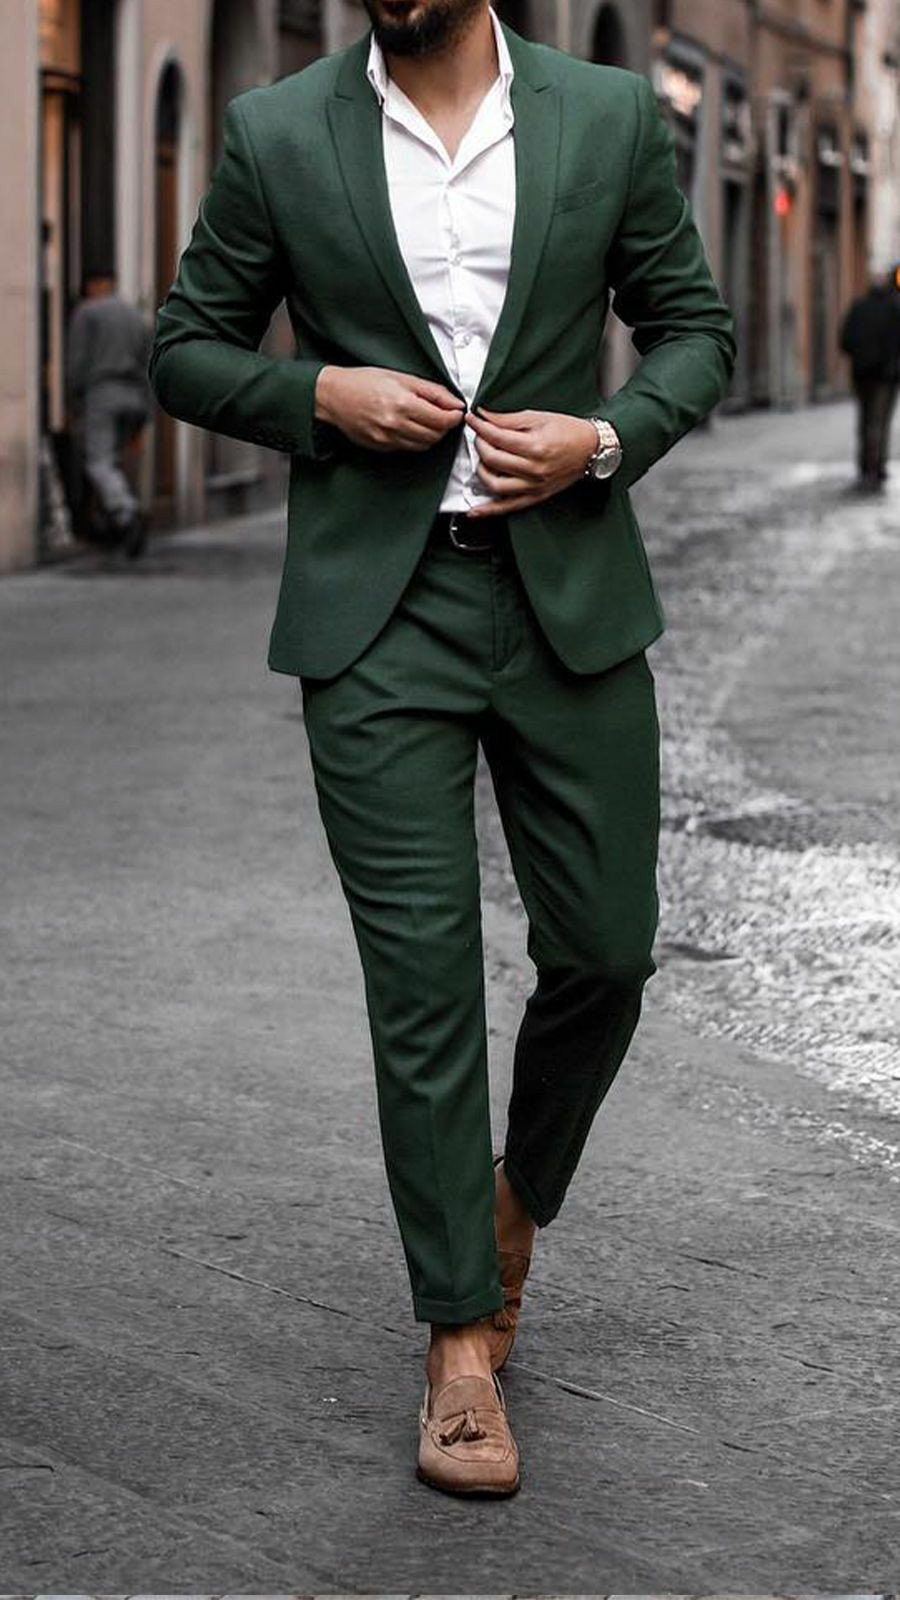 GREEN FORMAL SUIT Elegant Fashion Suit Green Two Piece - Etsy Ireland